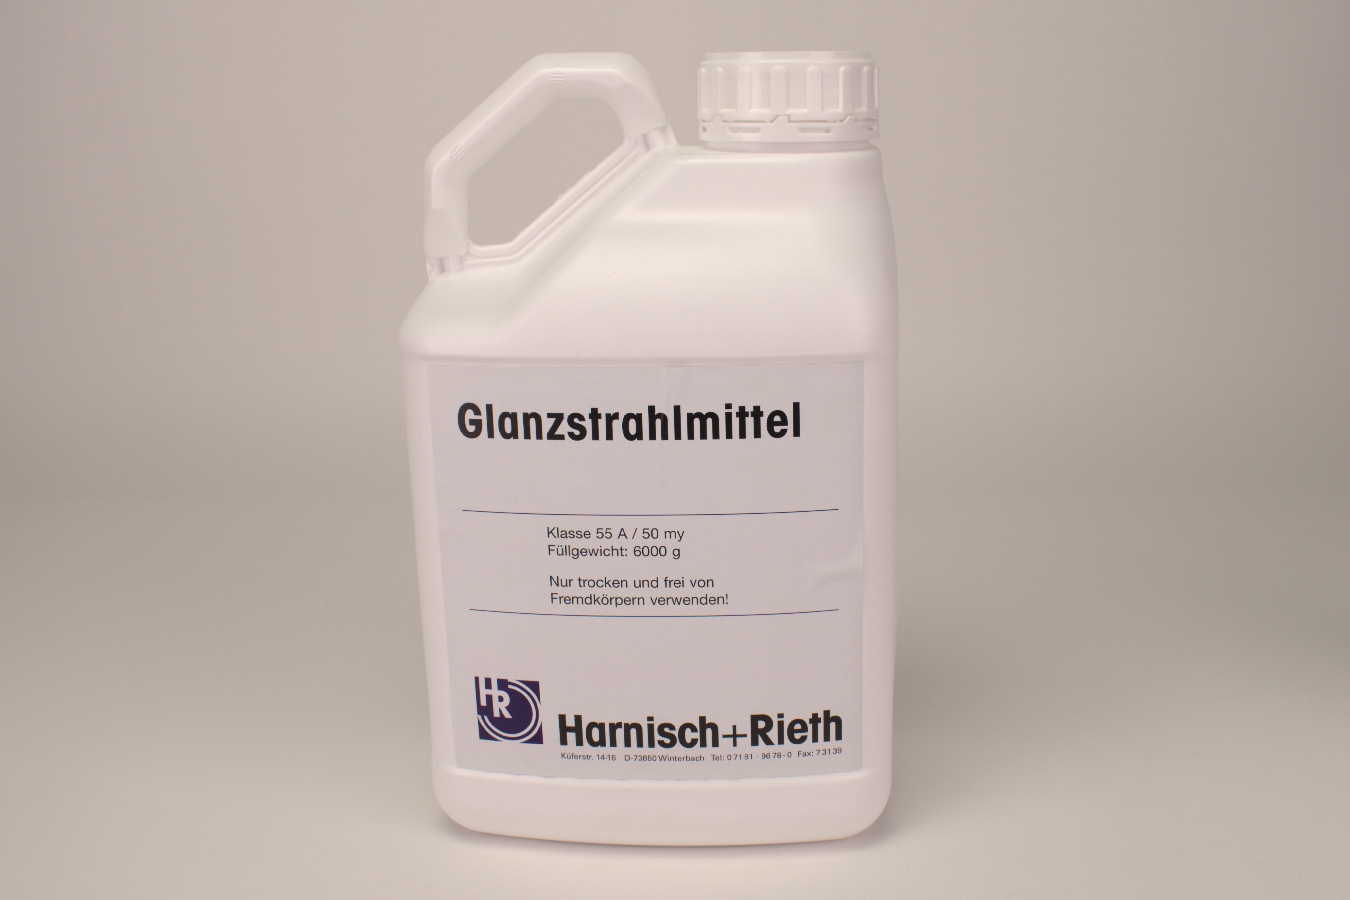 Glanzstrahlmittel 55 A/50my  6 Kg